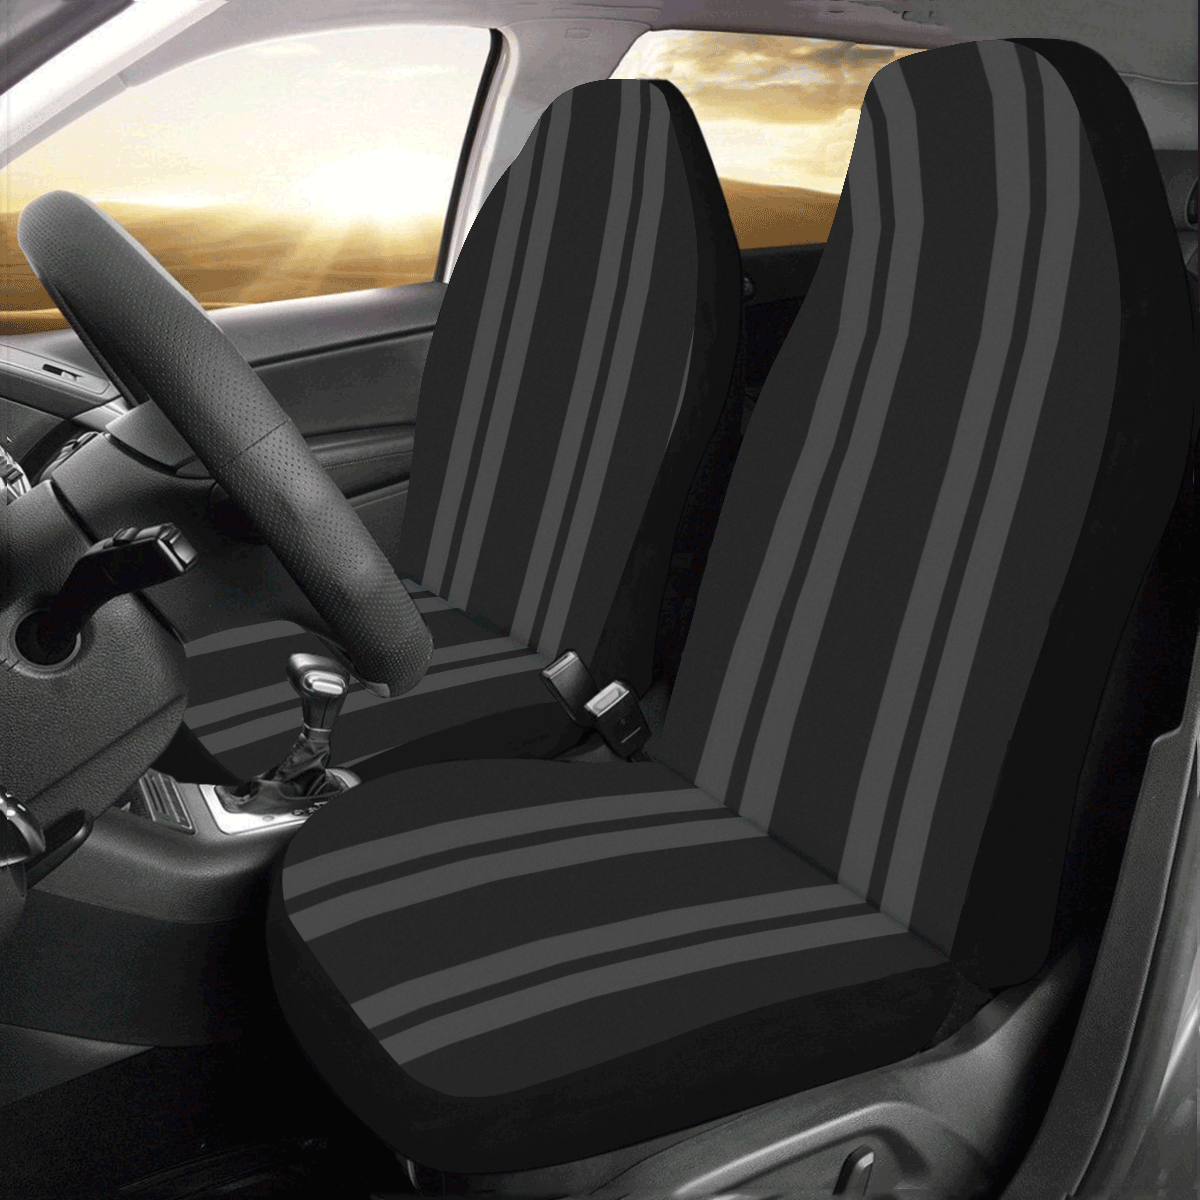 Gray/Black Vertical Stripes Car Seat Covers (Set of 2)